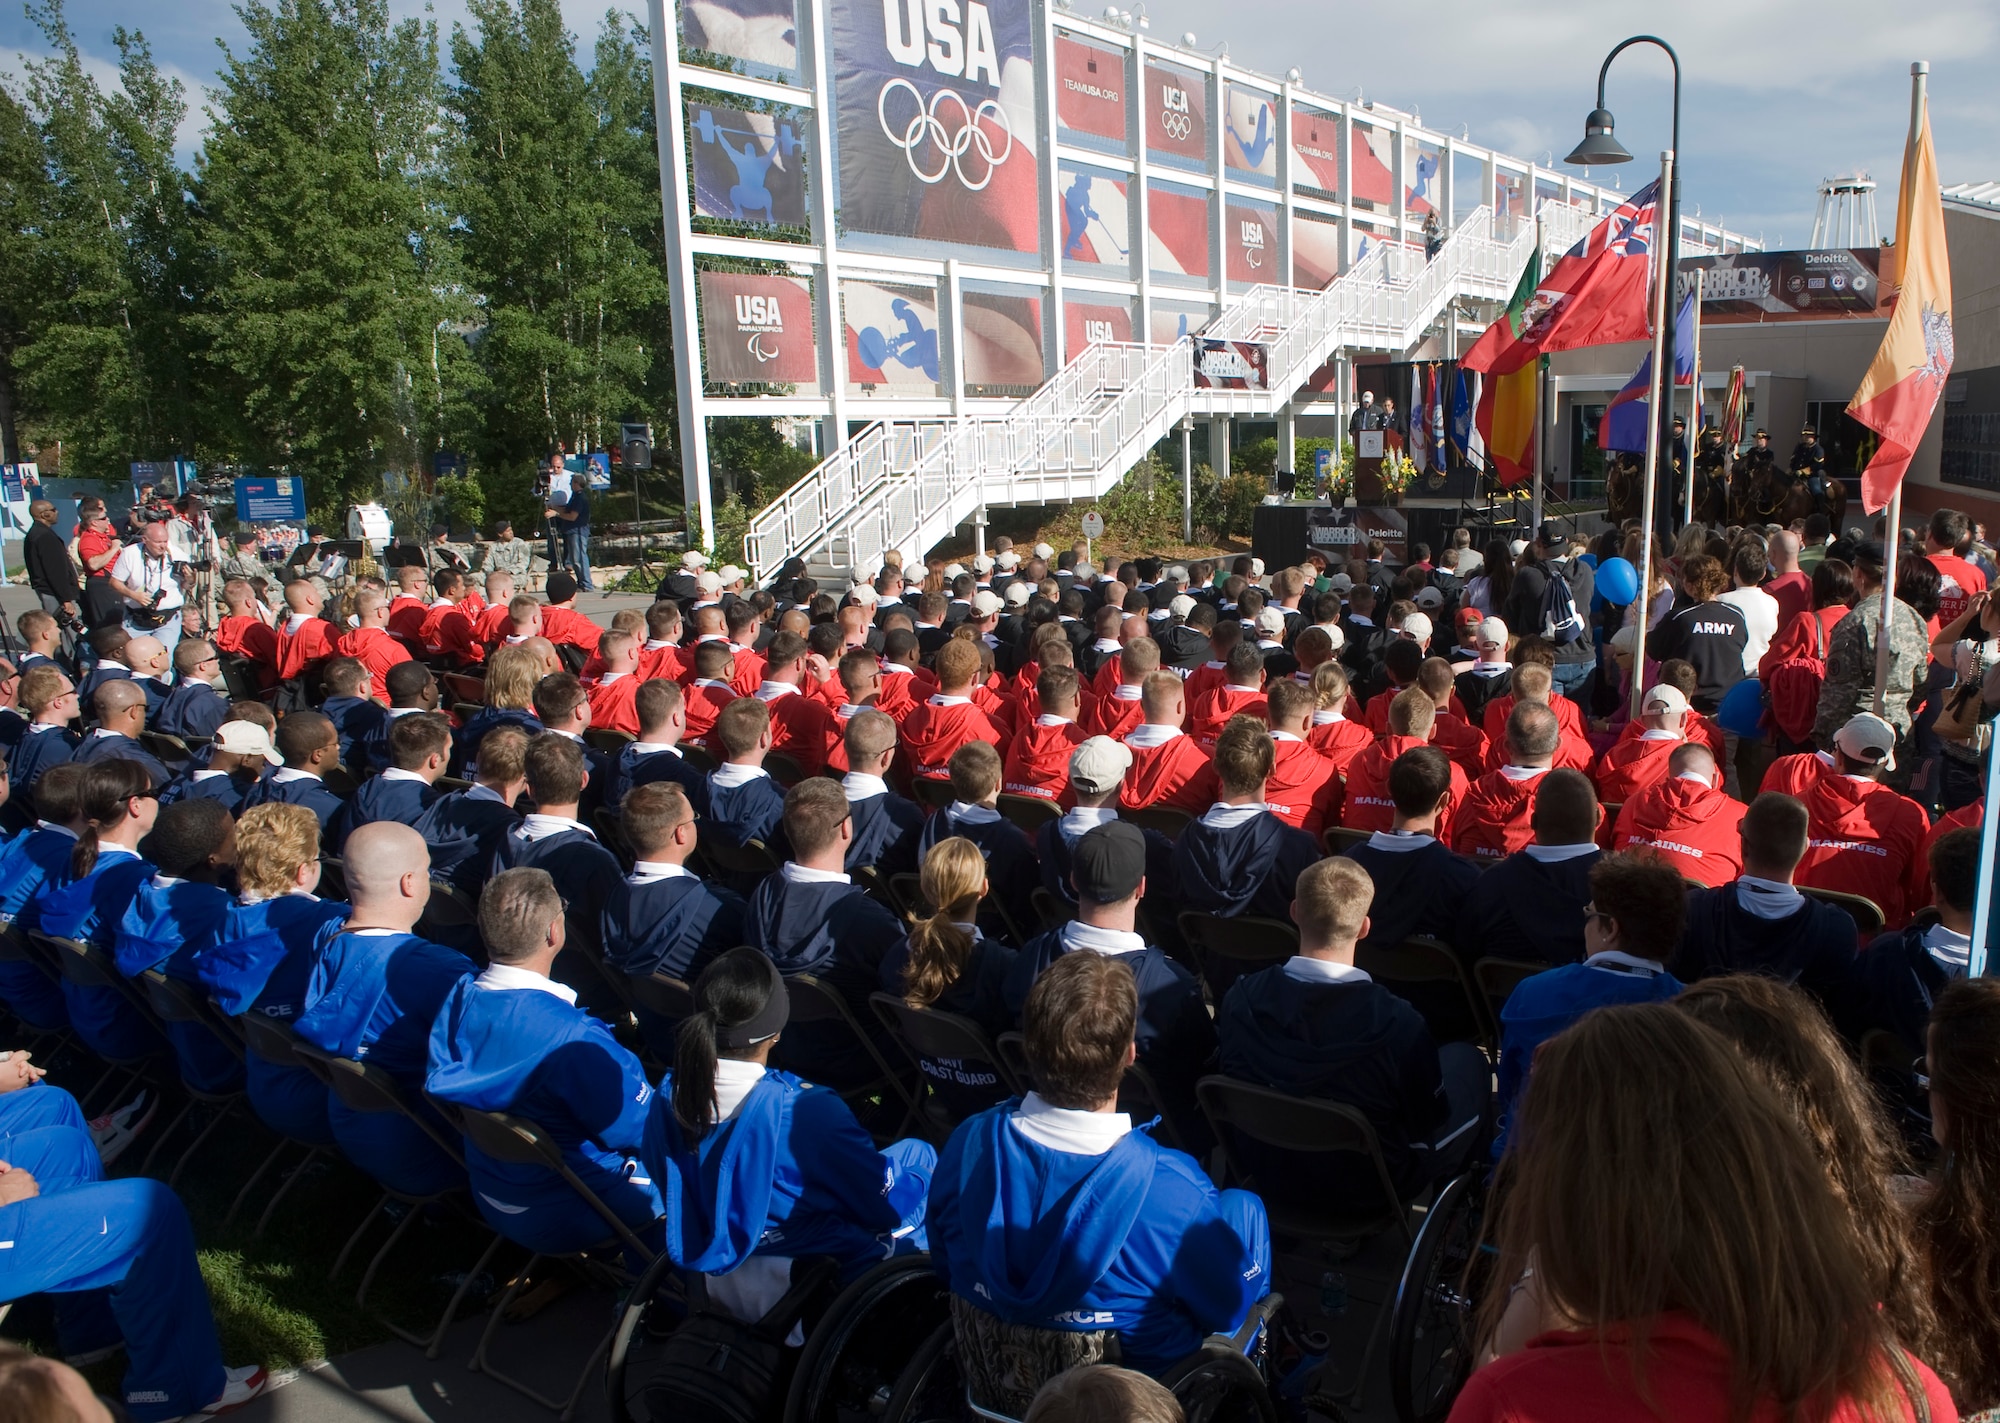 Teams representing the Army, Marine Corps, Navy and Coast Guard, Air Force and Special Operations Command sit May 16, 2011, during the 2011 Warrior Games opening ceremony at the Olympic Training Center in Colorado Springs, Colo. (U.S. Air Force photo/Staff Sgt. Christopher Griffin)